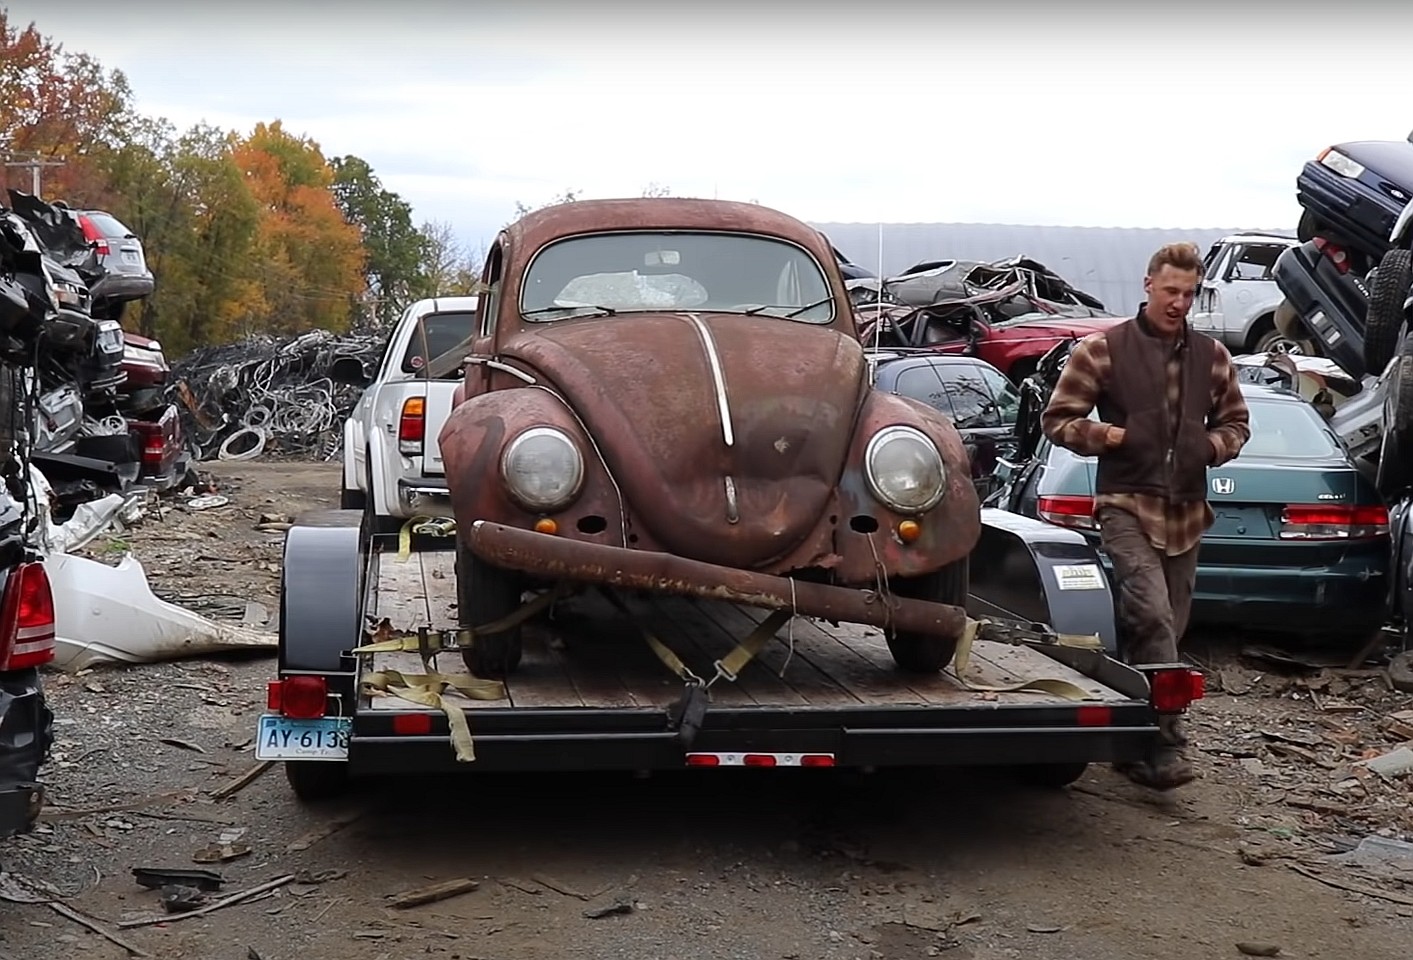 rare vw beetle spent 52 years in a junkyard gets rescued for full restoration 8